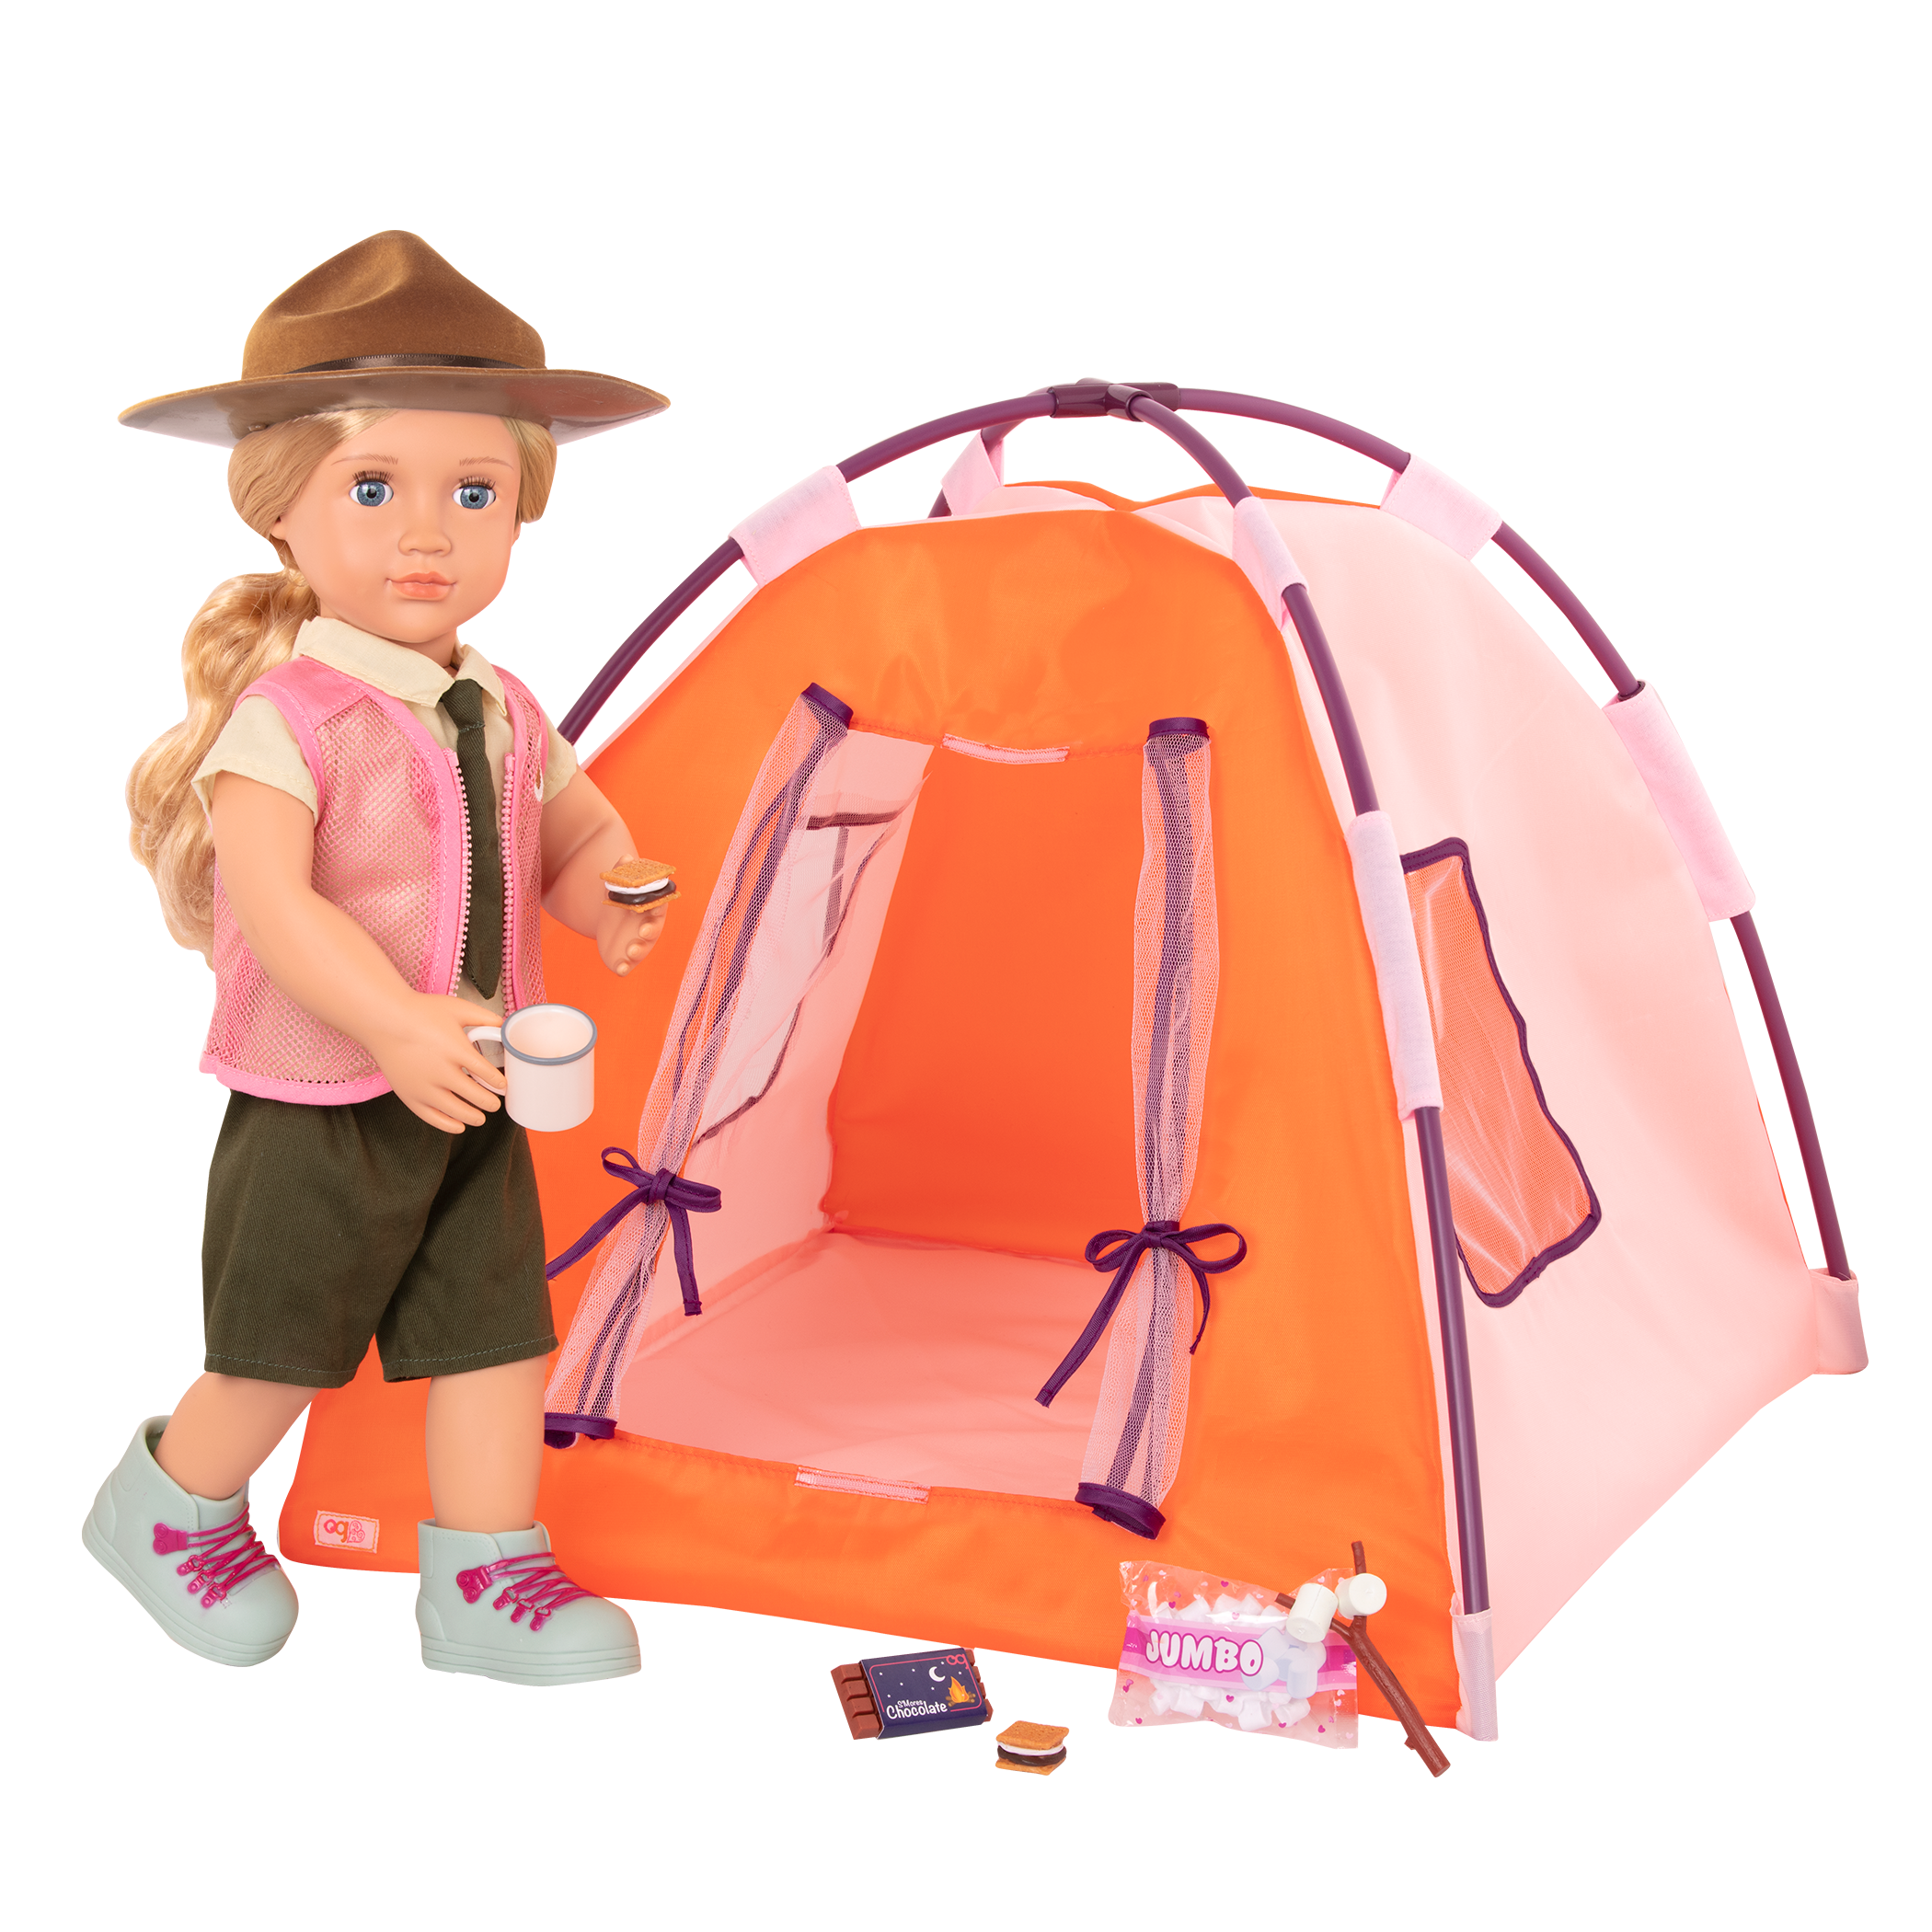 18-inch doll using camping playset